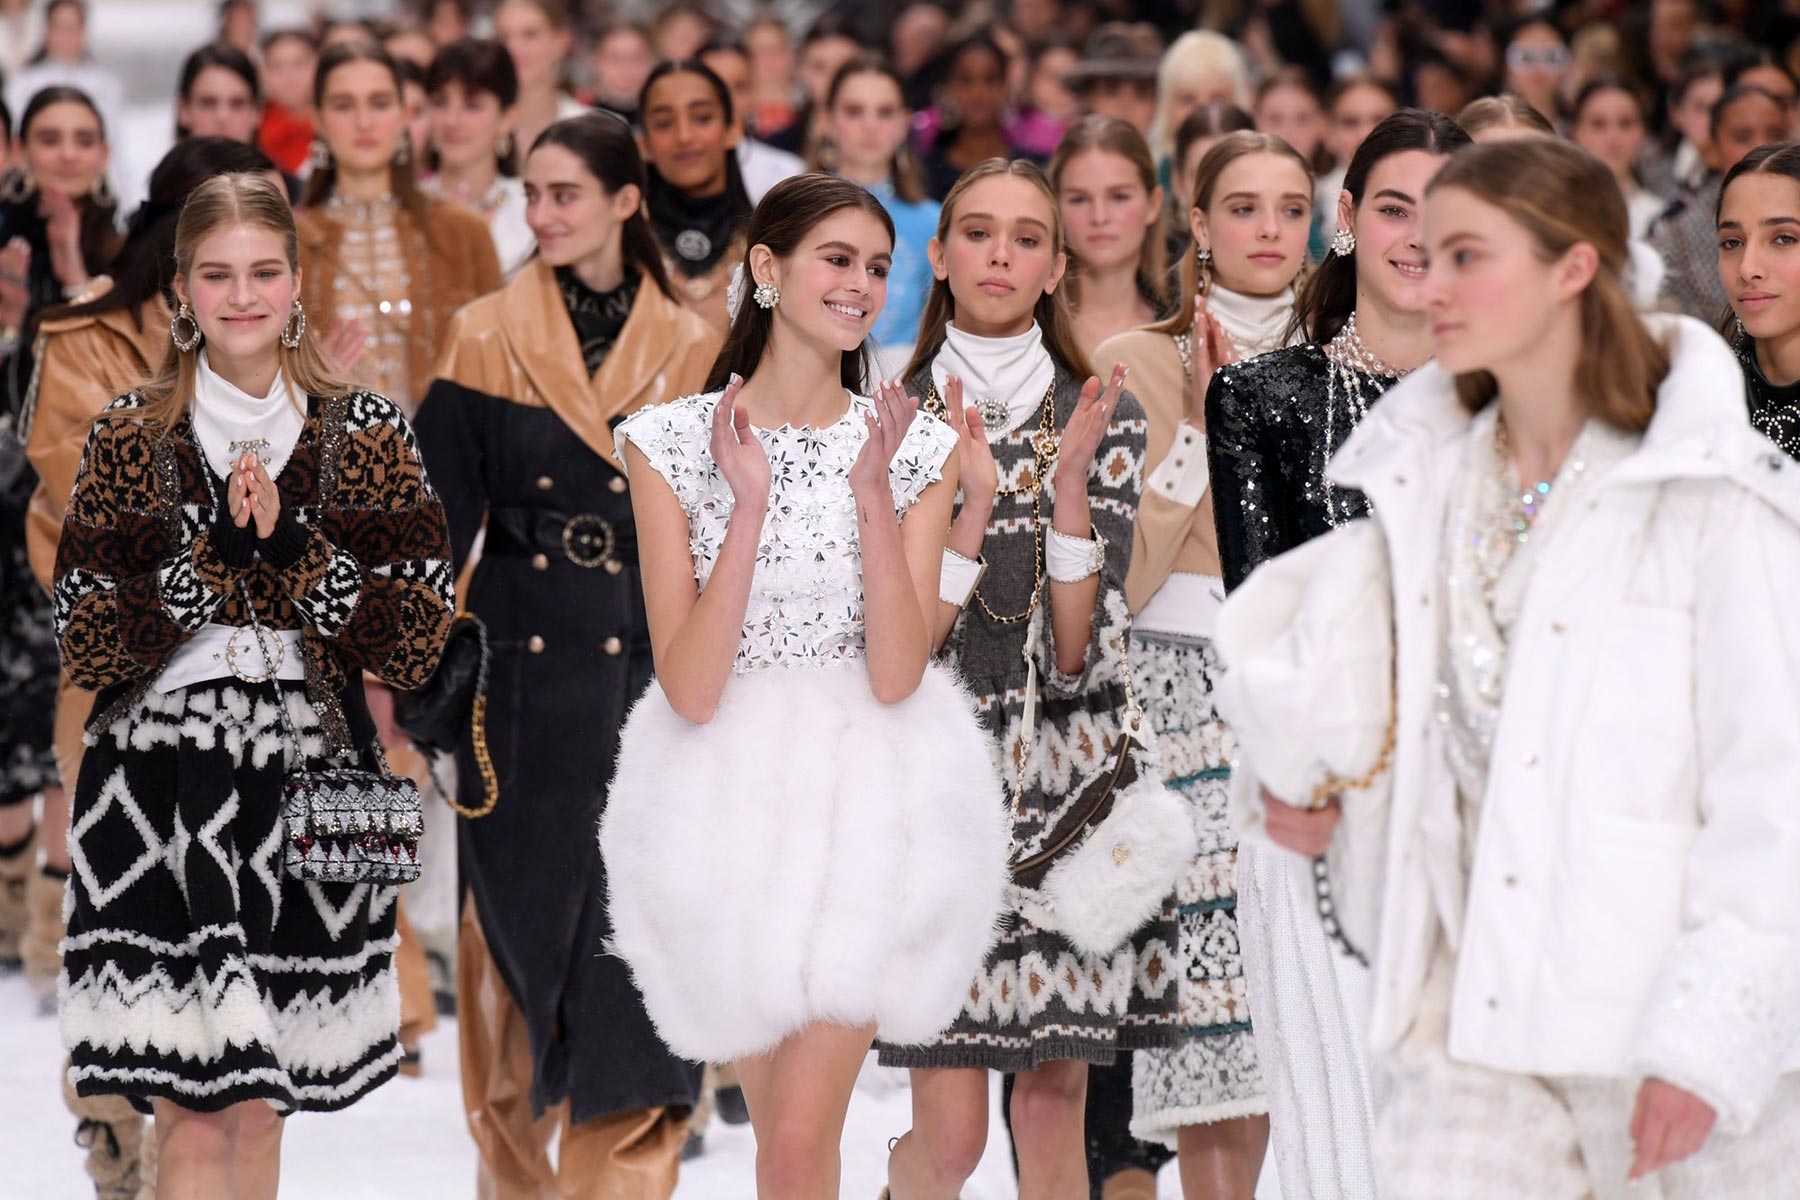 5 things about the Chanel Fall 2019 show that left us teary-eyed